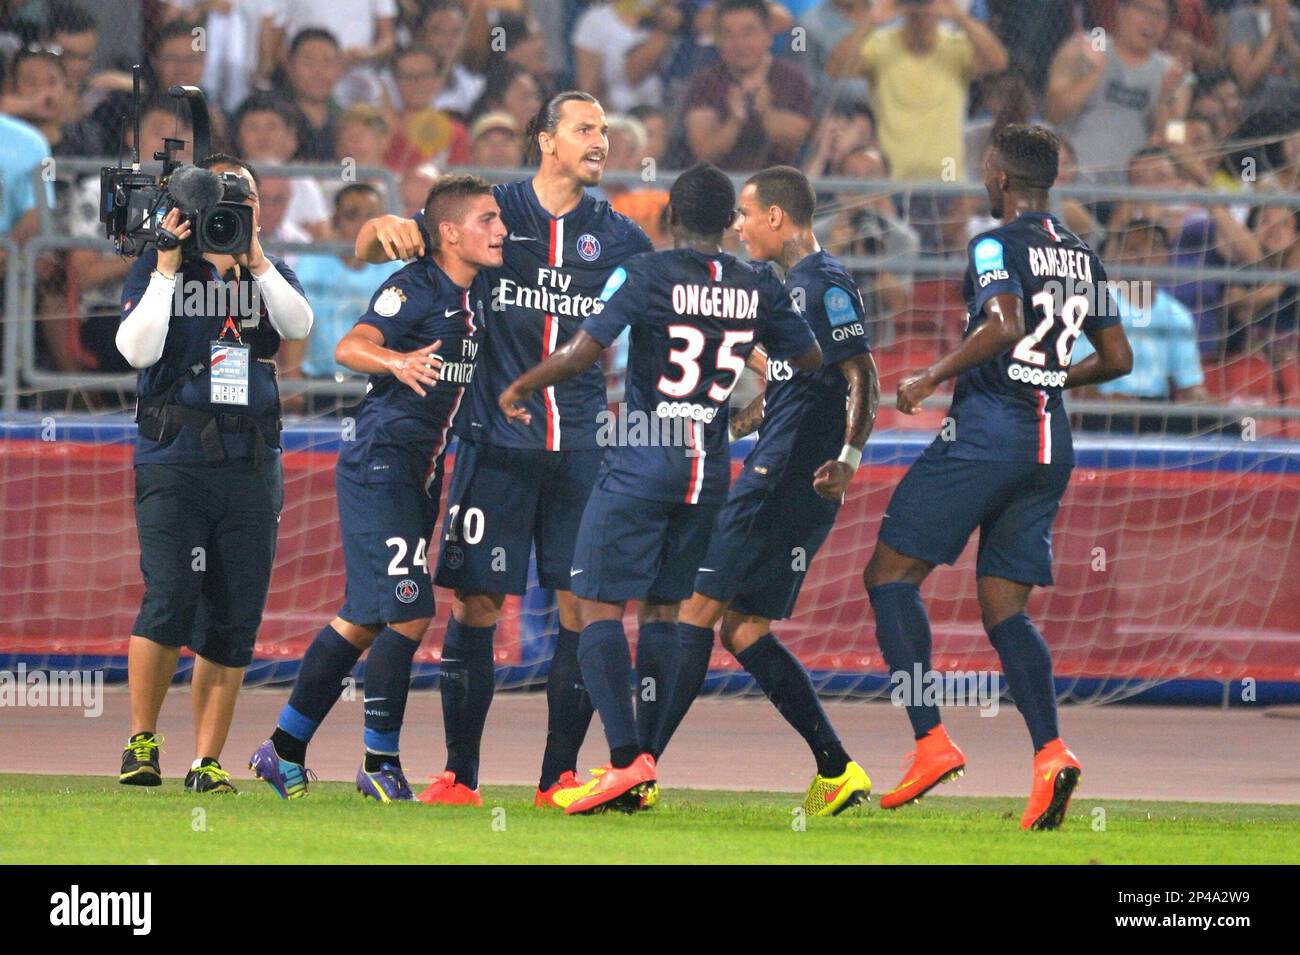 Zlatan Ibrahimovic of Paris Saint-Germain club, center, celebrates with teammates after scoring a penalty kick during the season-opening Champions Trophy soccer match against Guingamp football club in Beijing, China, 2